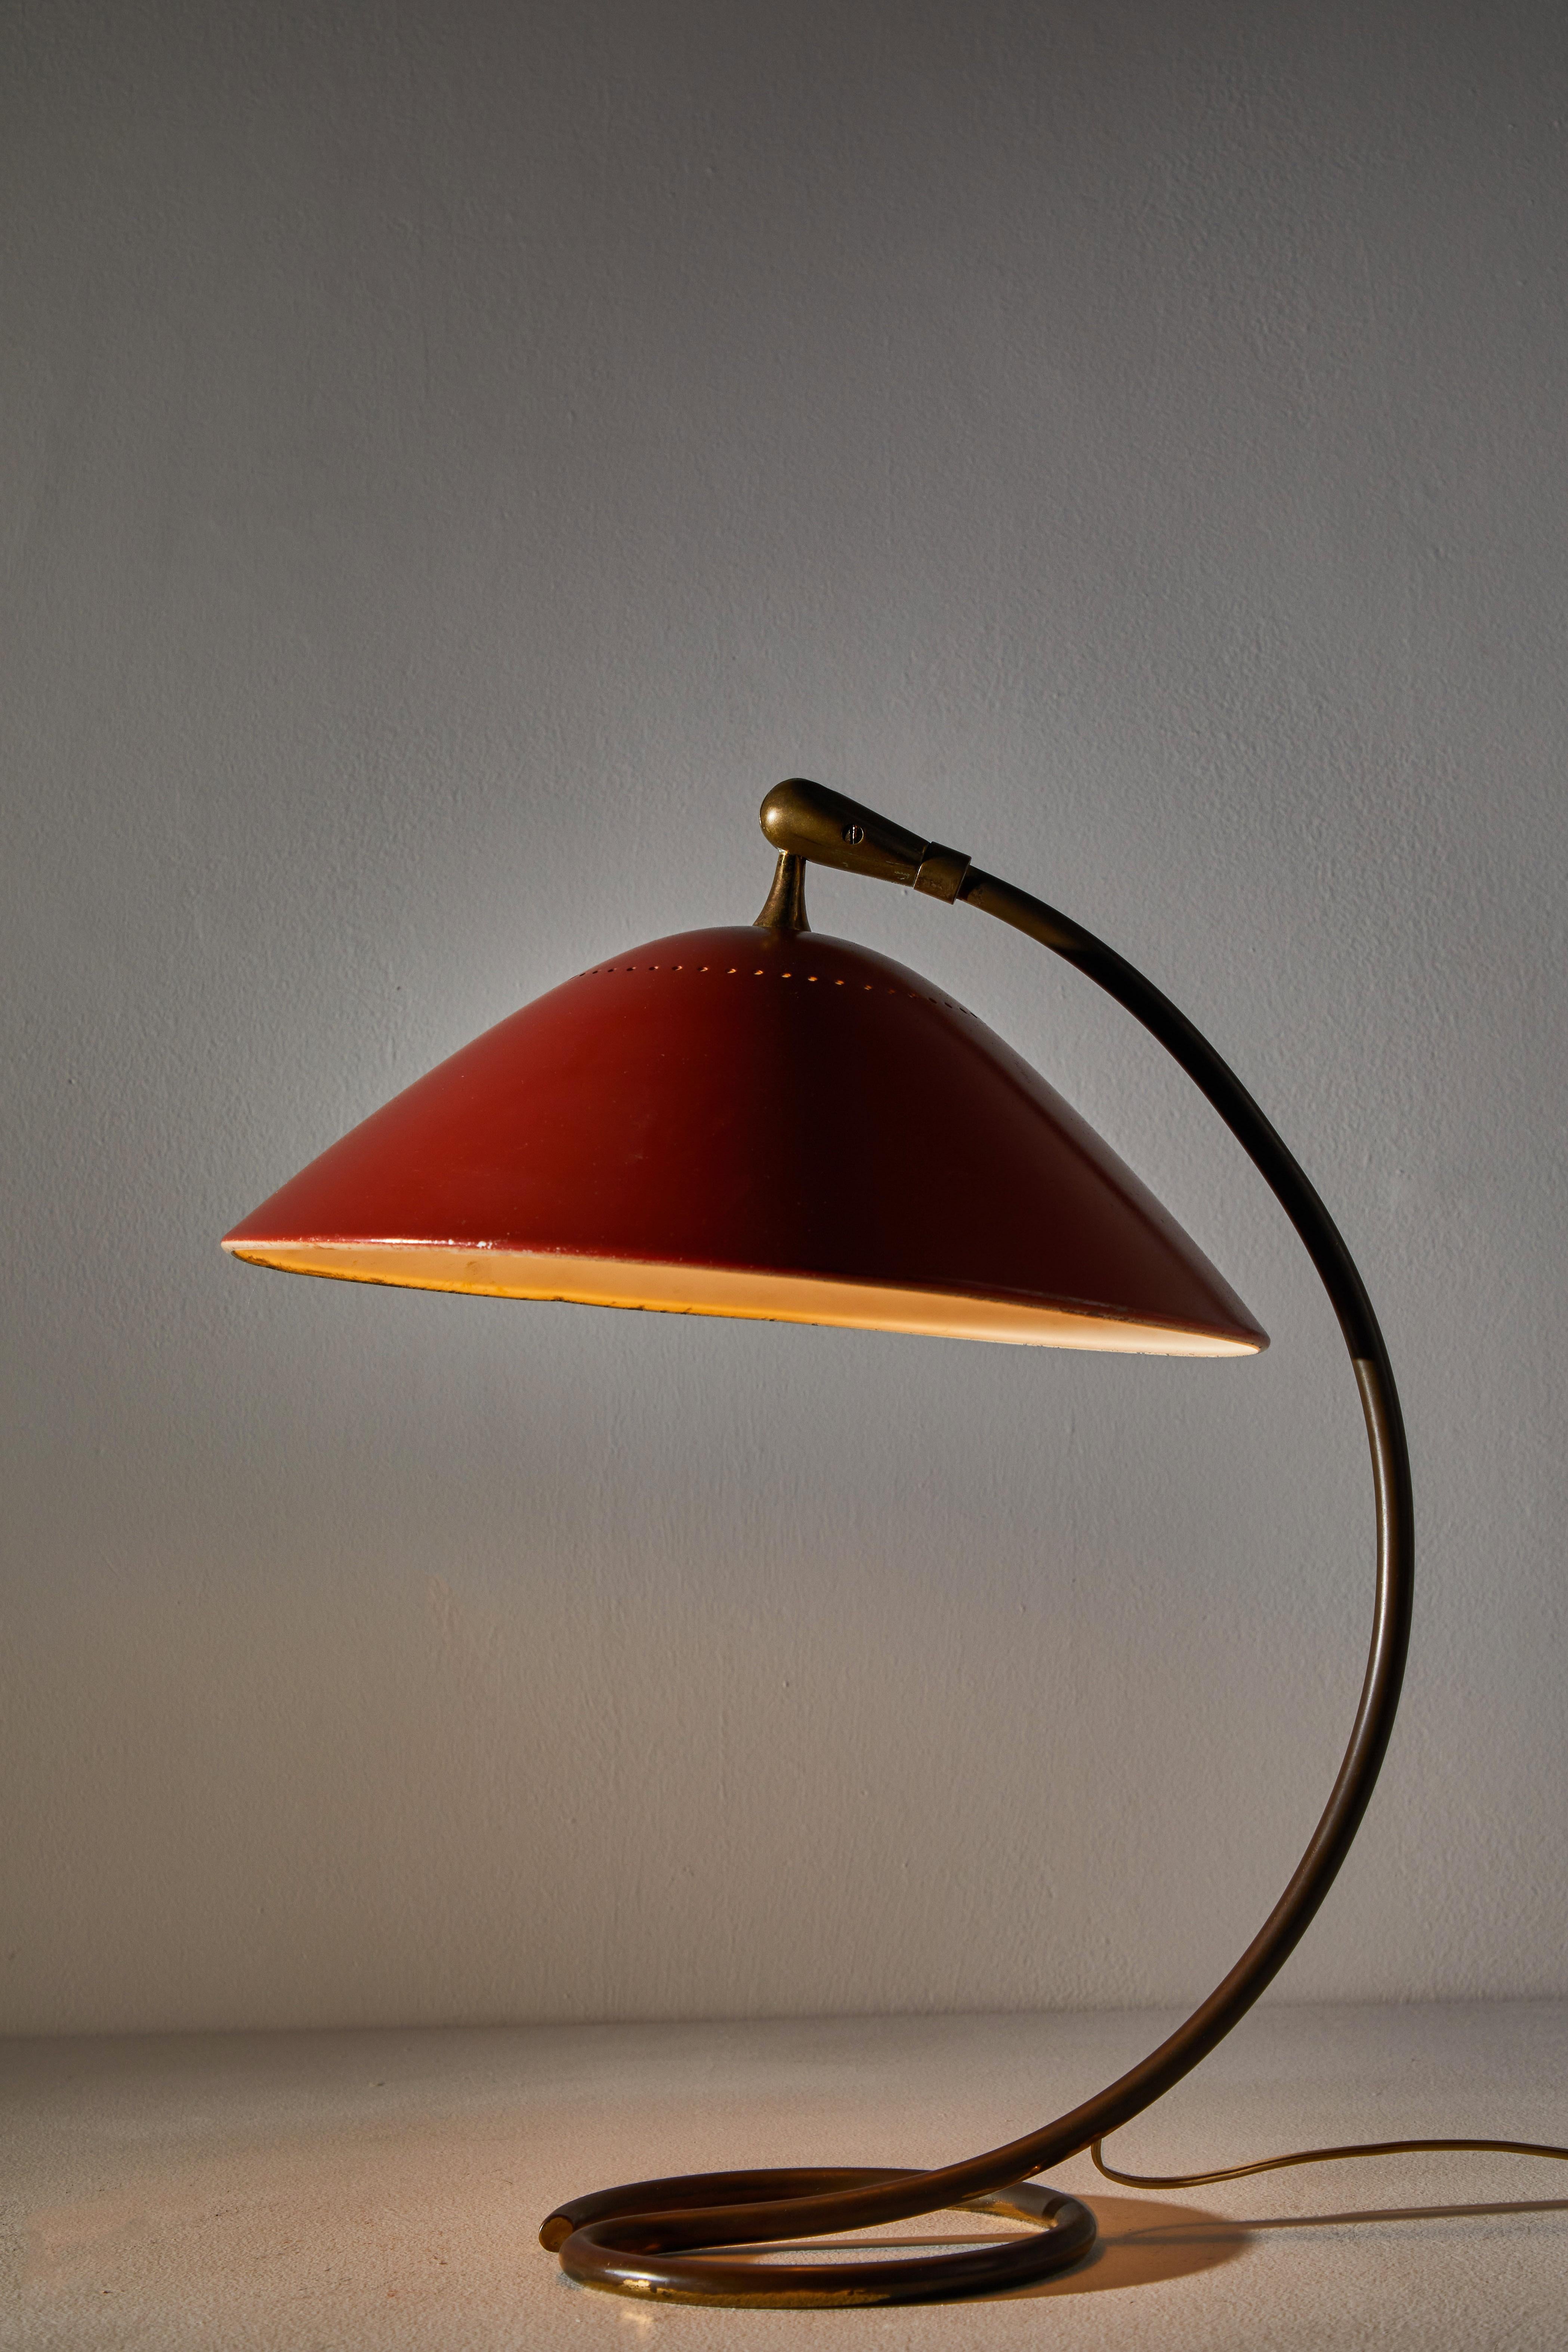 Table Lamp by Stilnovo. Manufactured in Italy, circa 1950s. Original enameled metal, brass. Original cord. We recommend one E14 100w maximum candelabra bulb. Bulb provided as a one time courtesy.